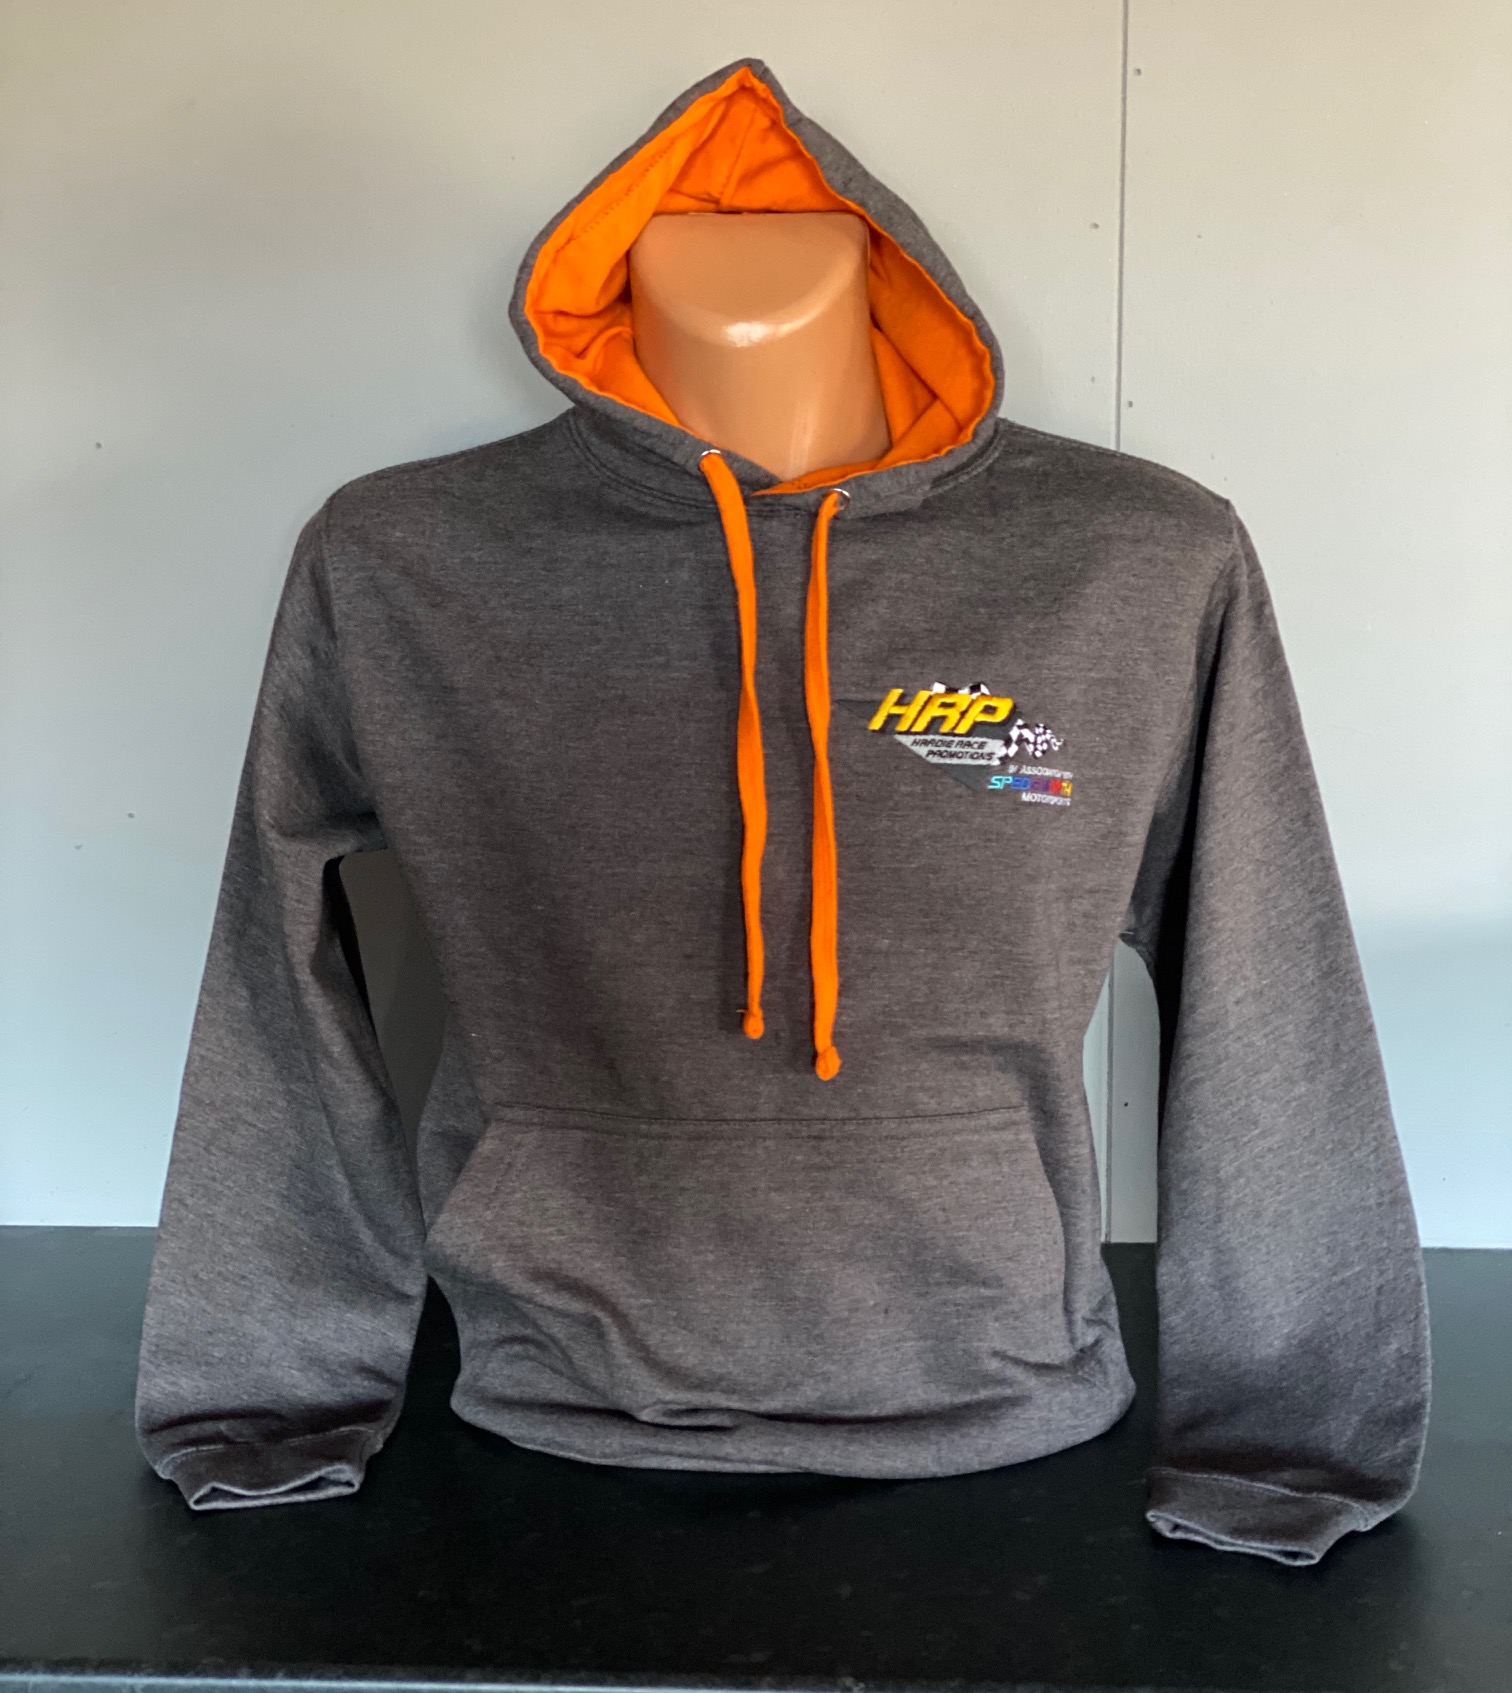 New for 2020 - HRP Clothing